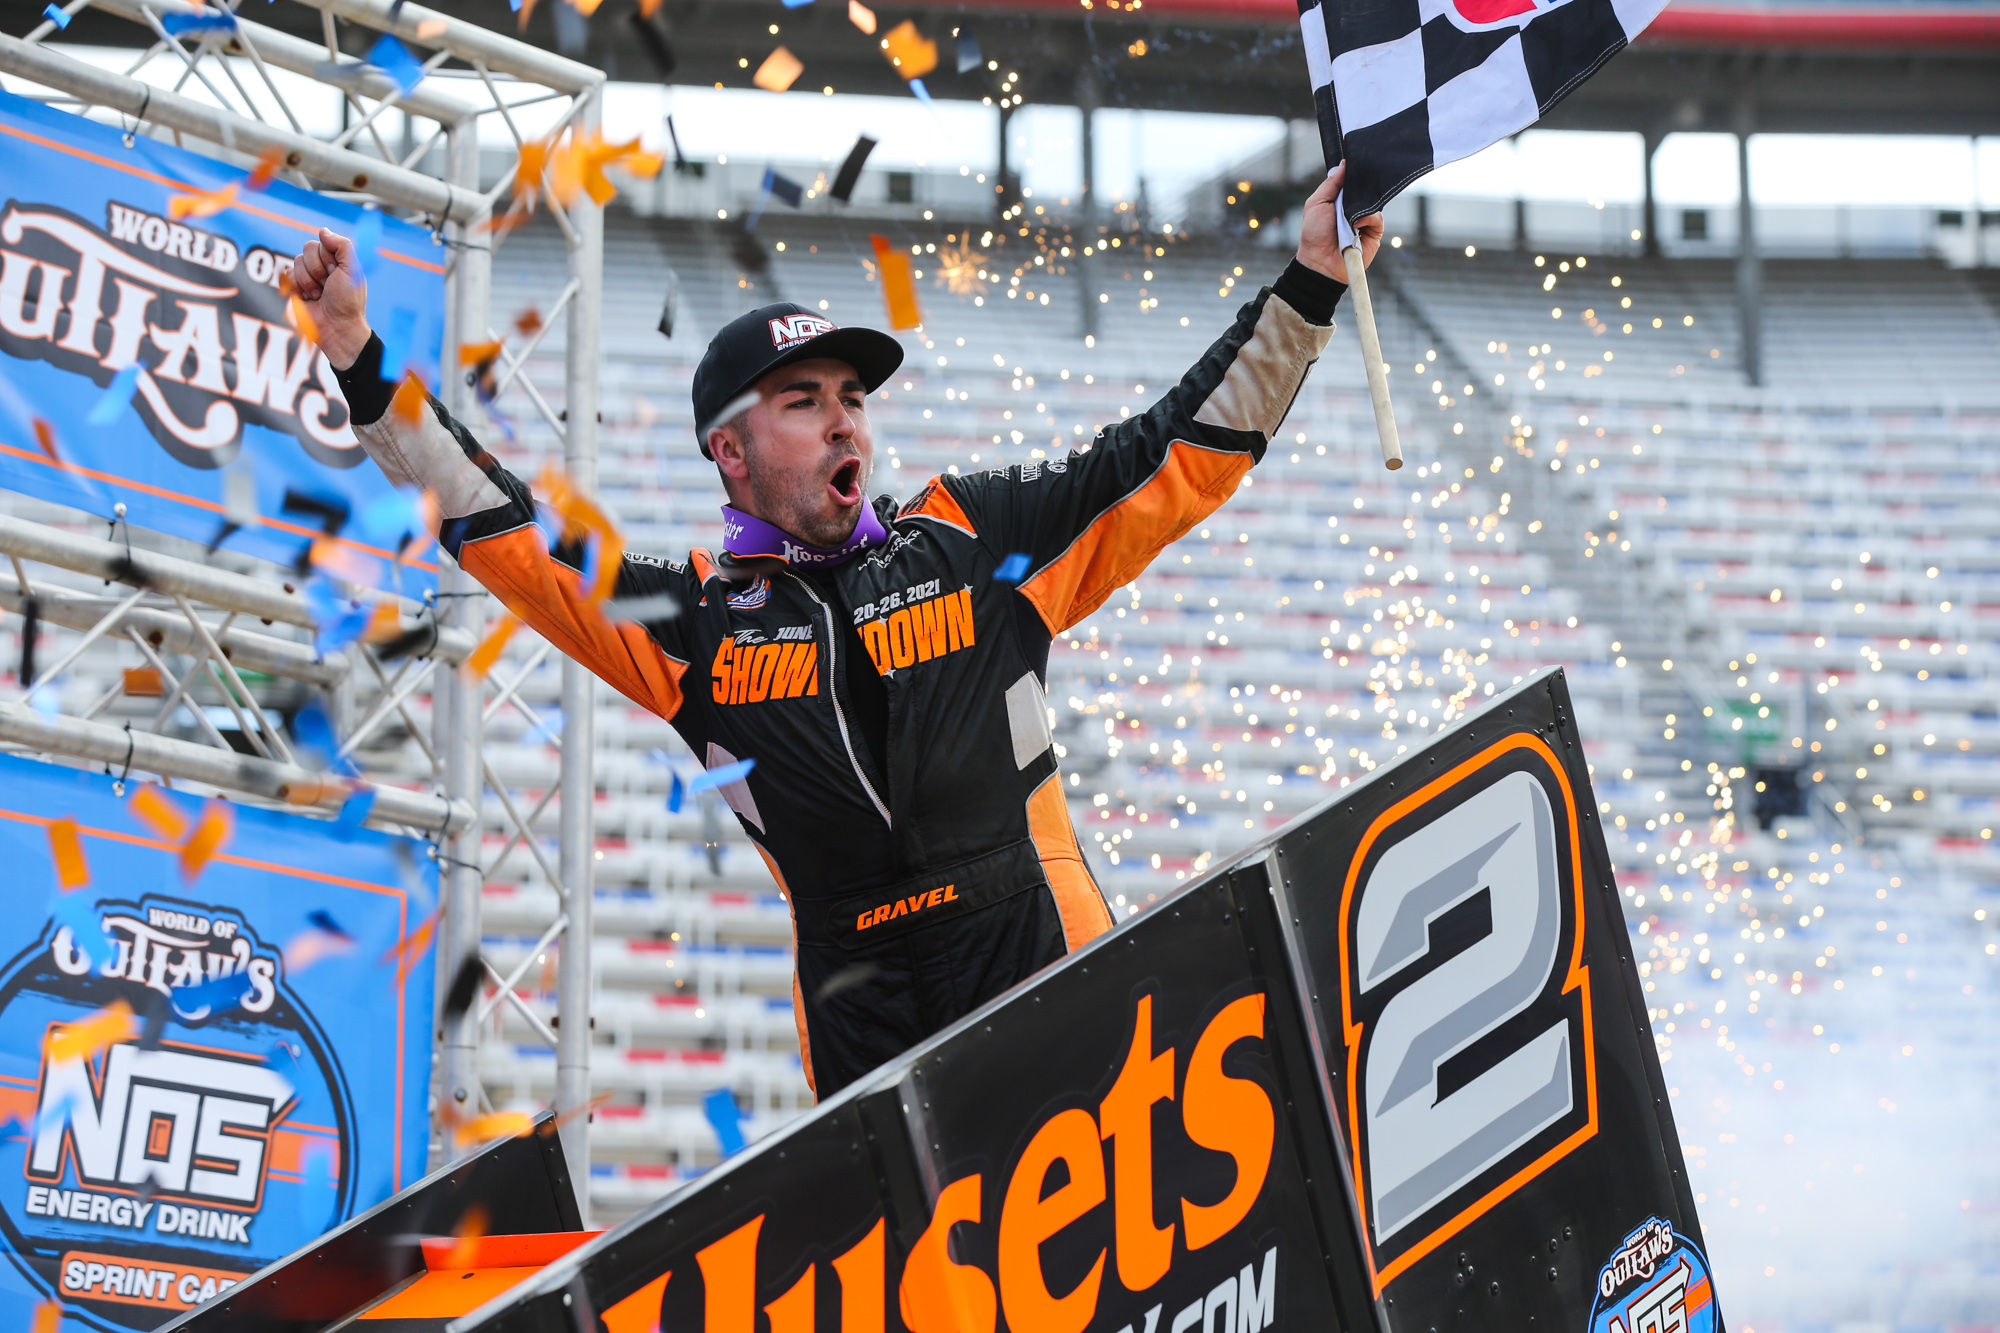 David Gravel Gets 25,000 for Sweeping World of Outlaws at Bristol